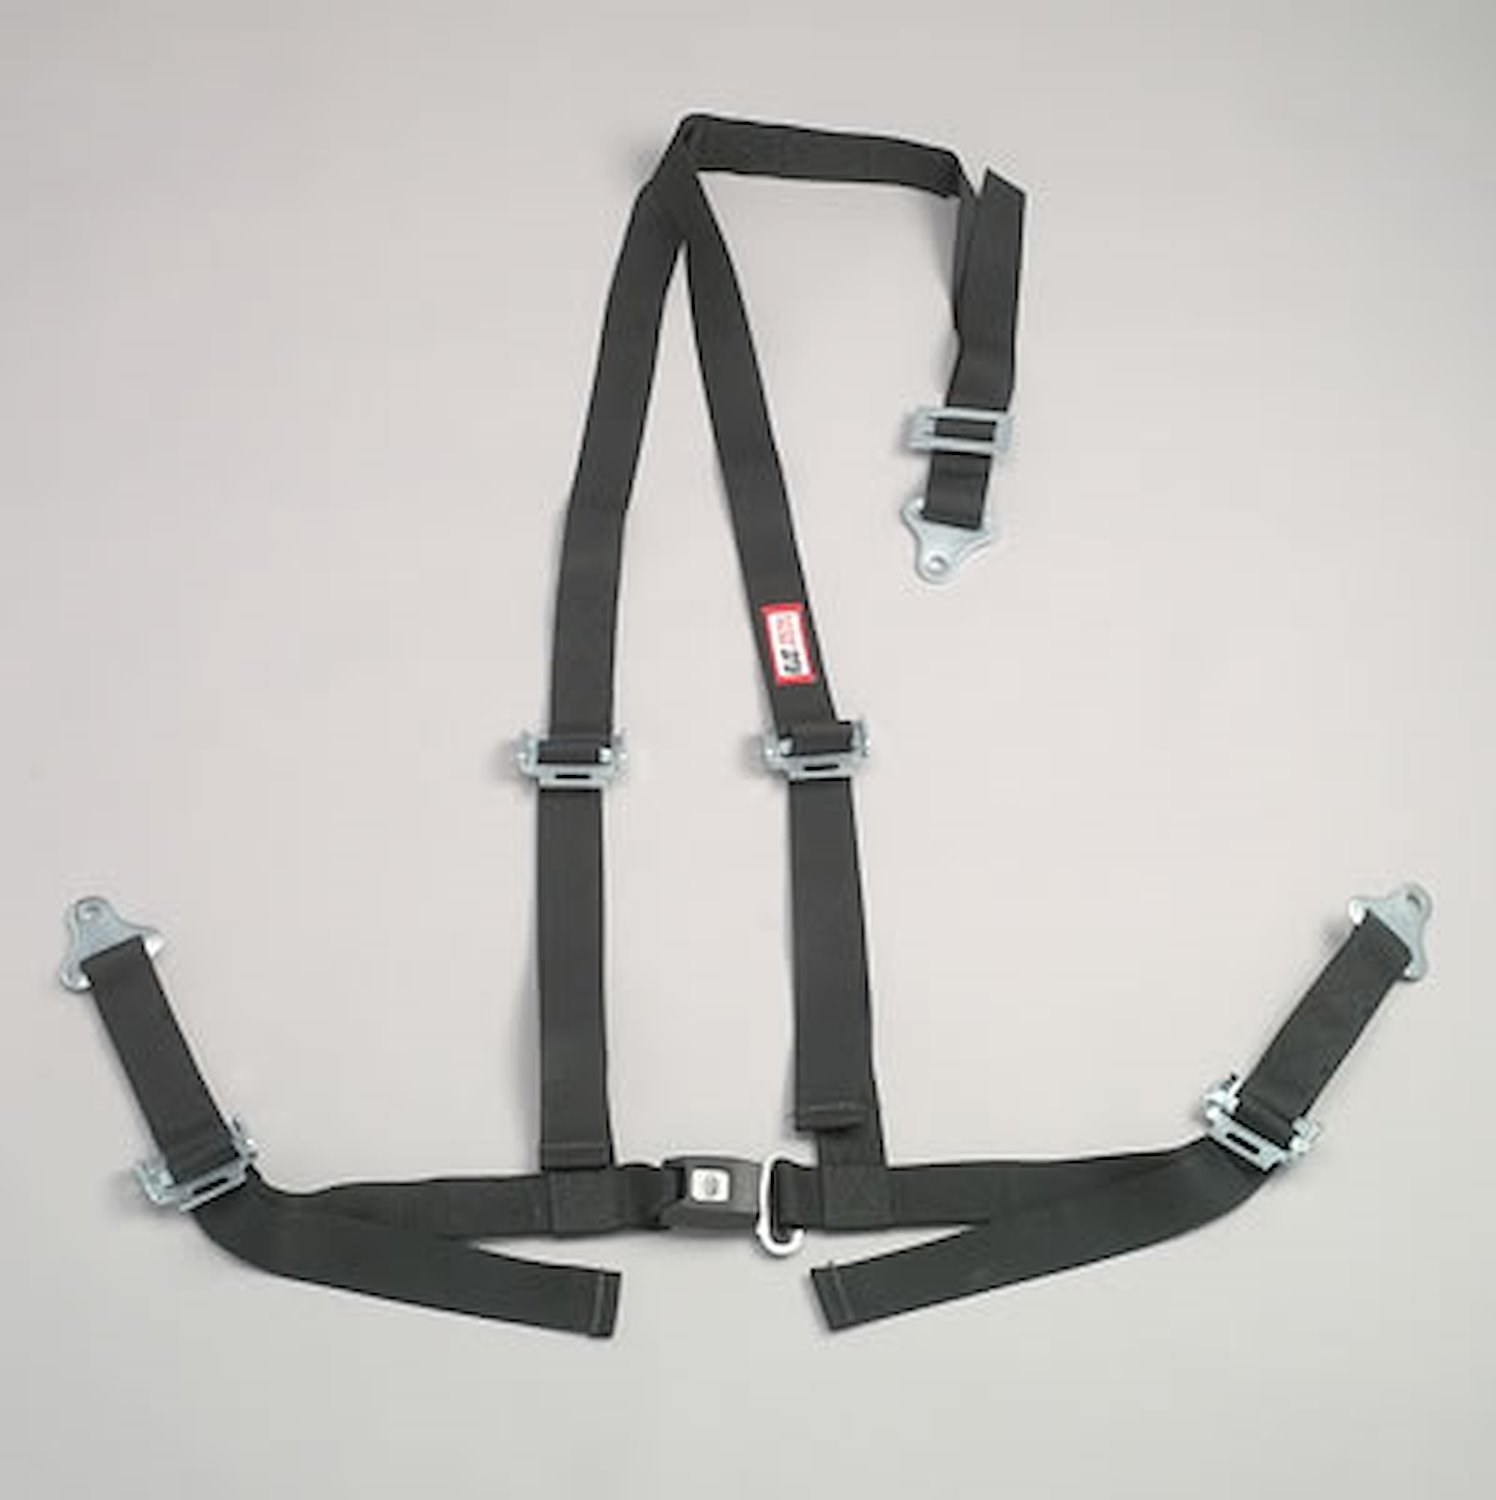 NON-SFI B&T HARNESS 2 PULL DOWN Lap Belt SNAP 2 S. H. Individual ROLL BAR Mount WRAP/SNAP YELLOW